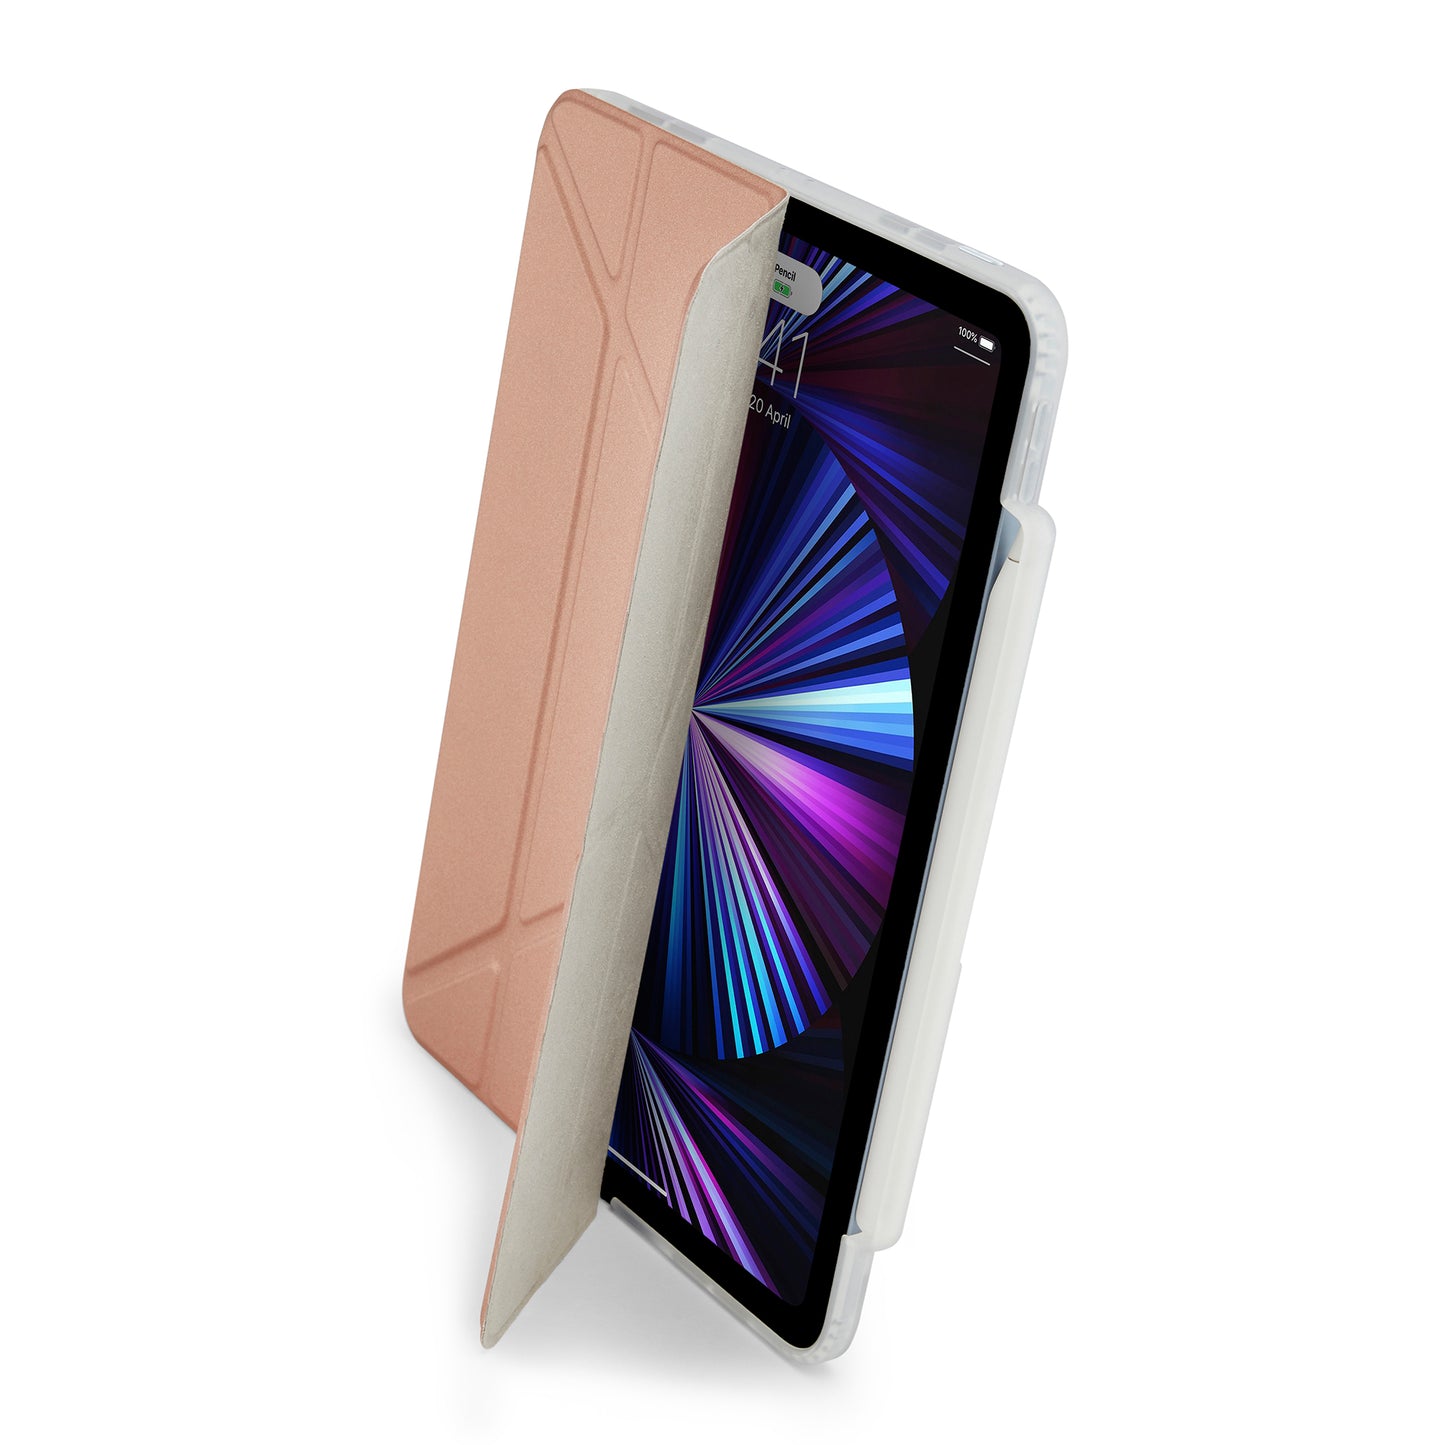 PIPETTO Origami No3 Case for iPad Pro 11 1st-4th Gen (2018-2022) - Rose Gold